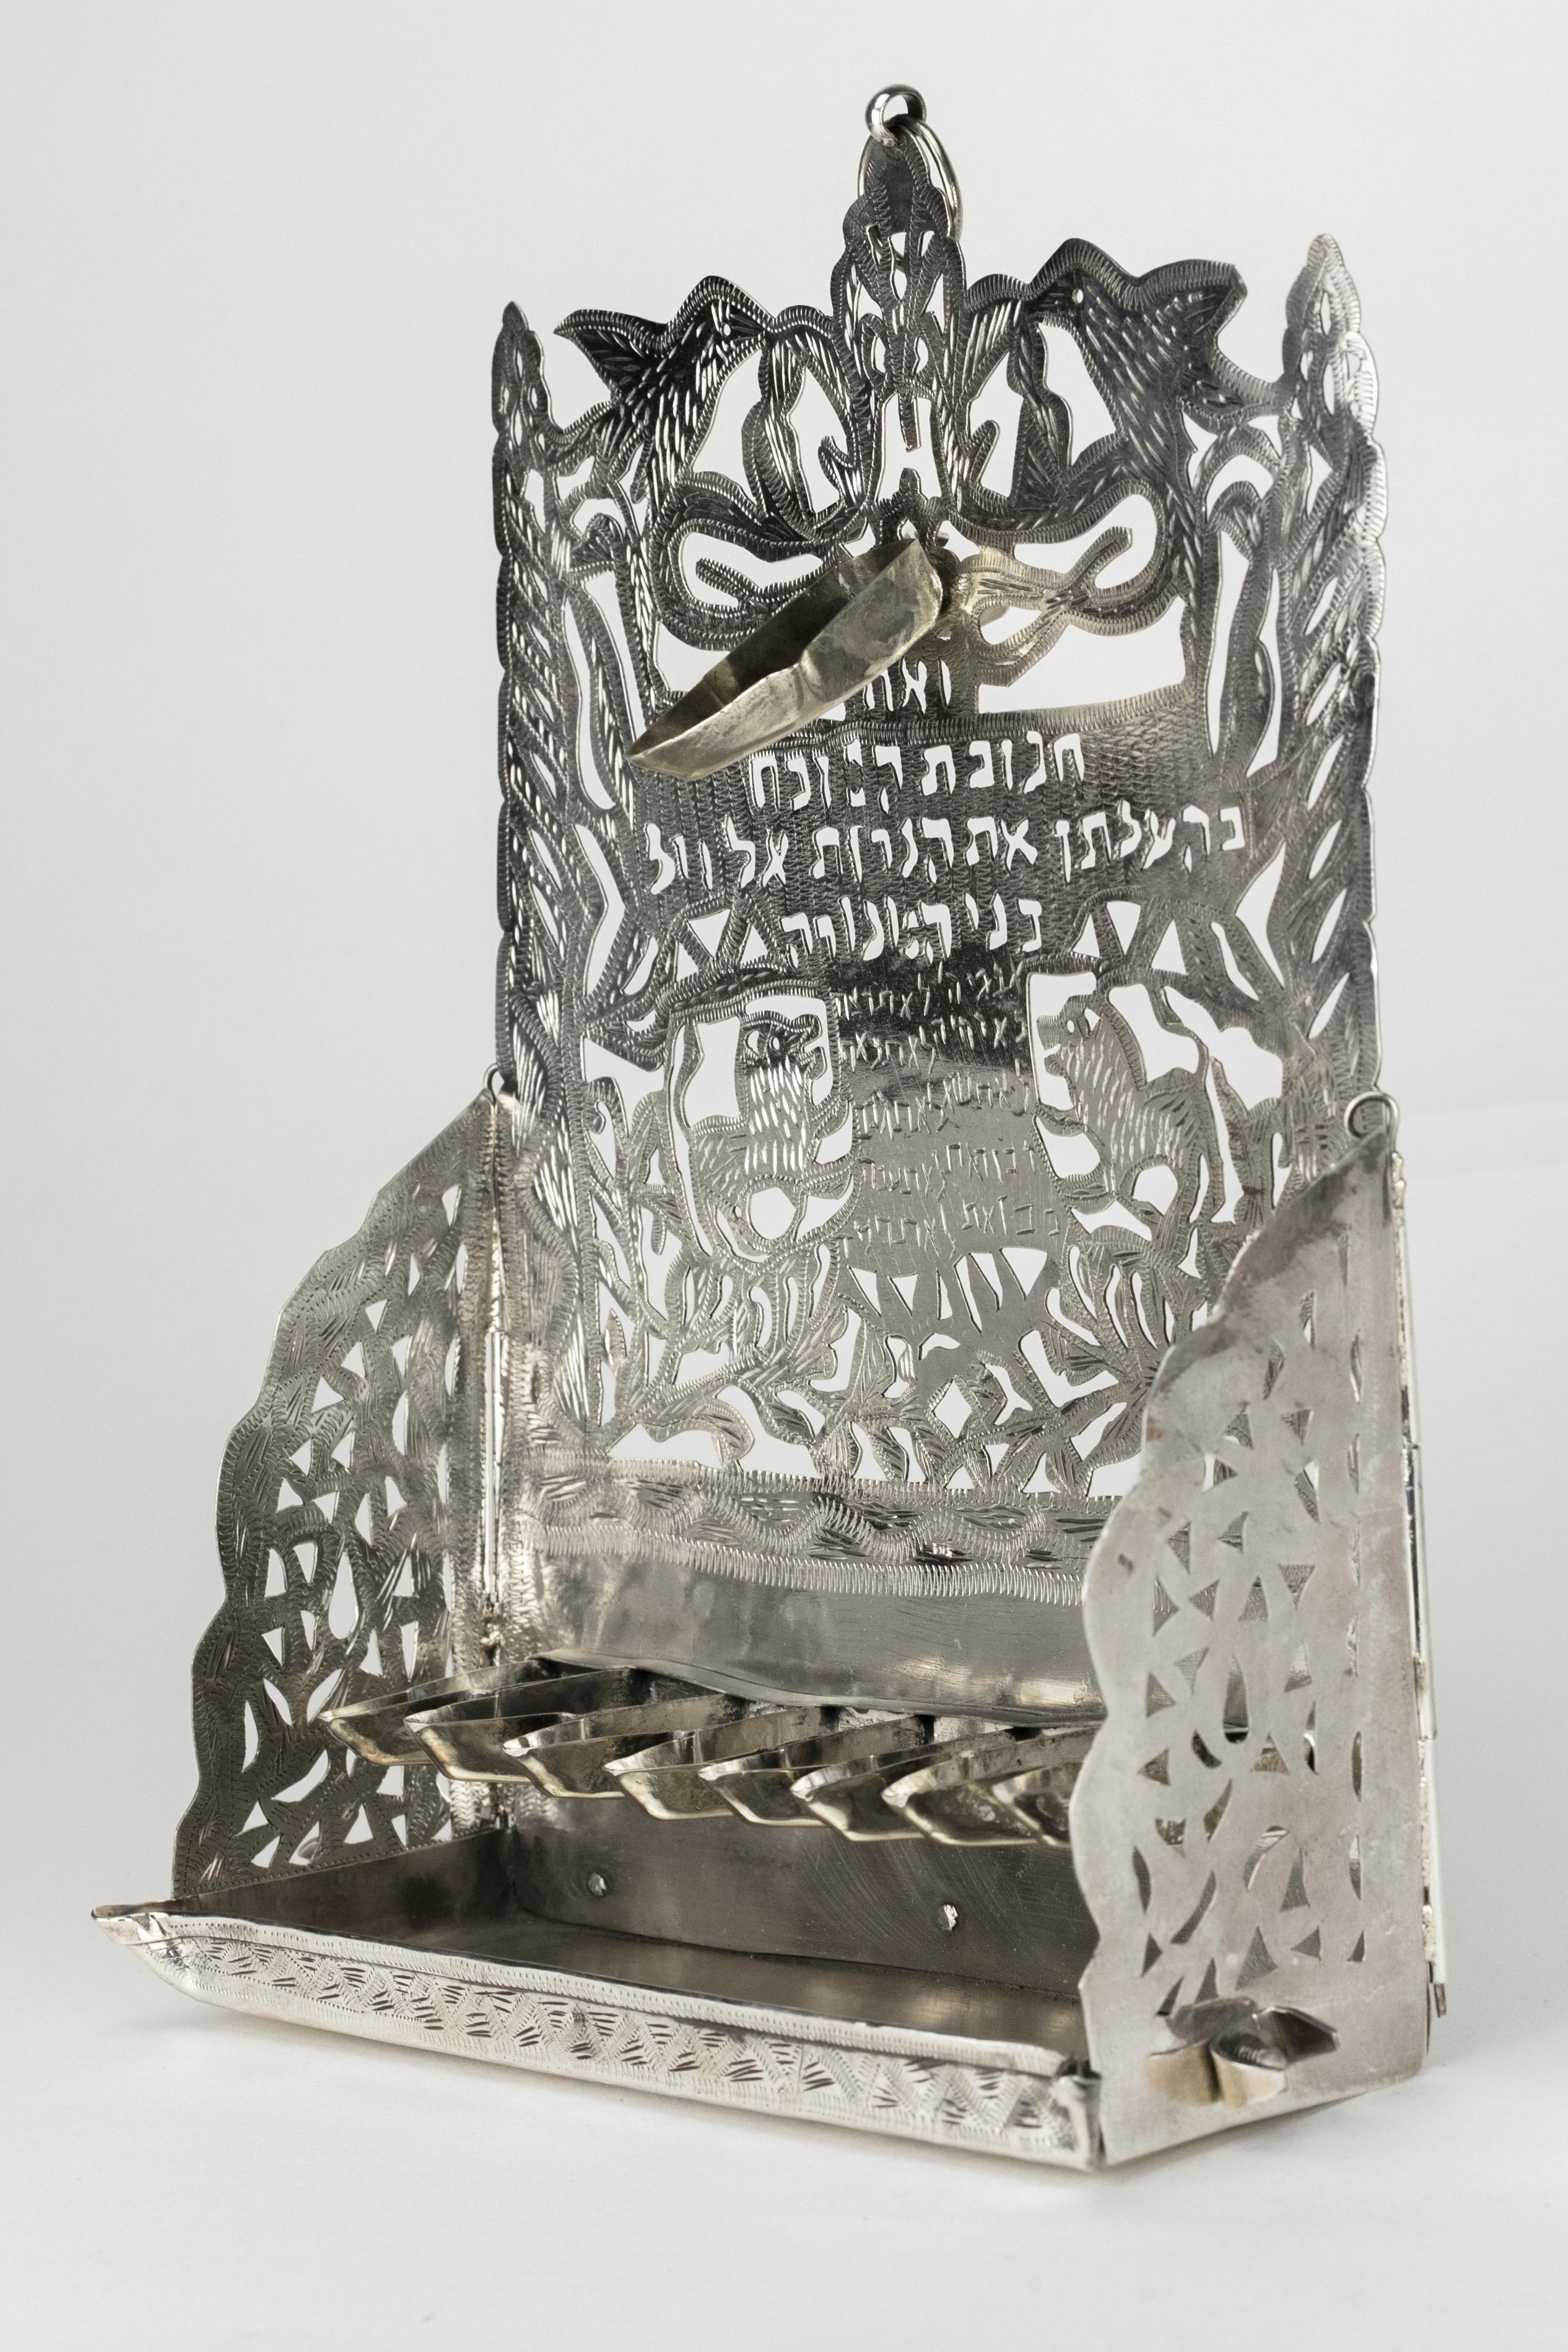 Handmade silver Hanukkah lamp, Morocco, circa 1910. 
Cutout and engraved back plate with dense vegetal patterns at the bottom, two lions flaking the Table of Decalogue at the center, two pillars on the sides, and two birds above the Shamsh. Two sawn